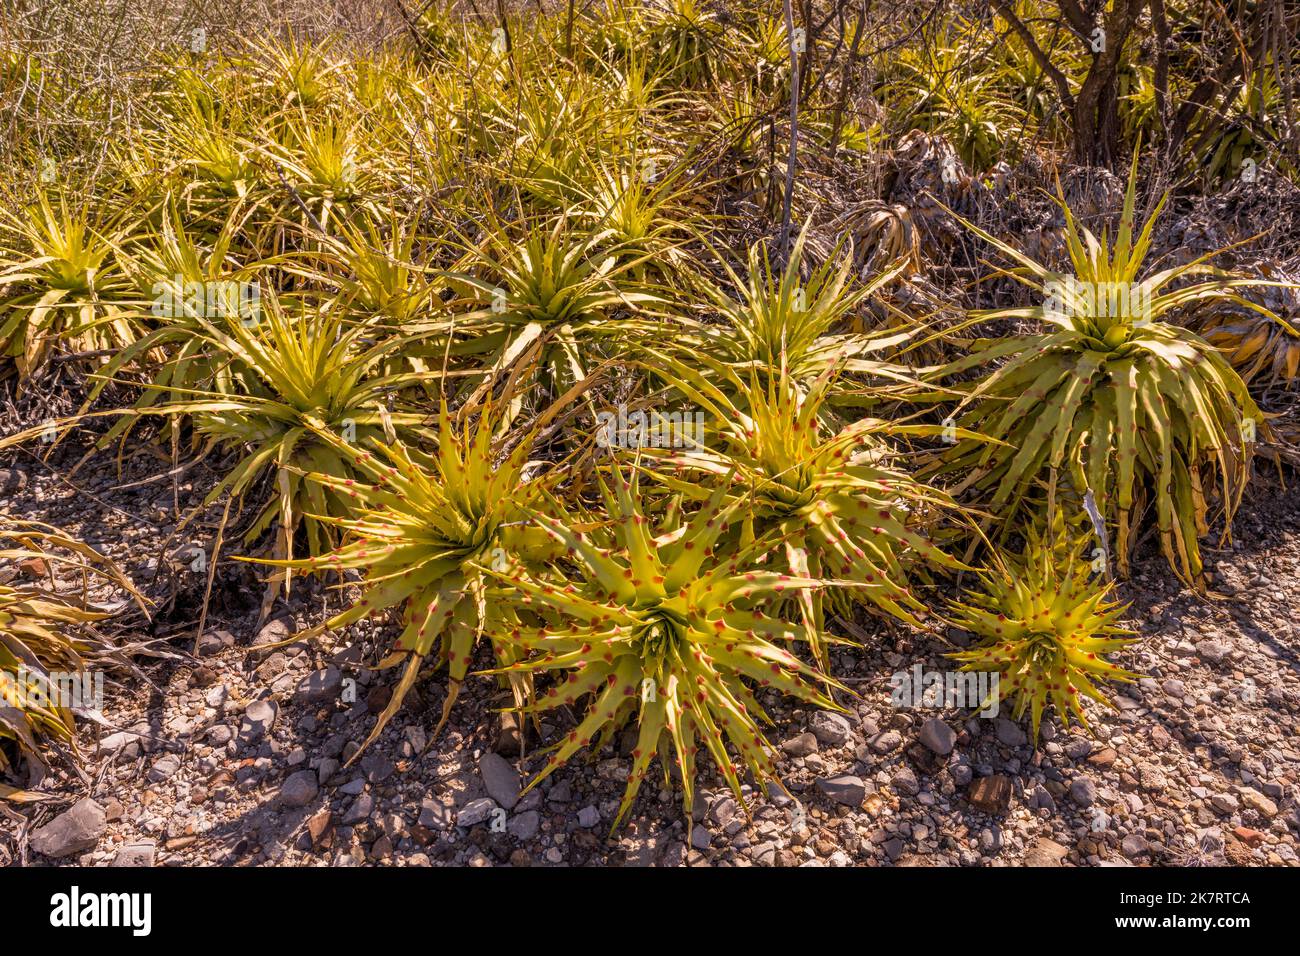 Hechtia tehuacana (lechugilla amarilla), a endemic bromeliad species, at the Tehuacan-Cuicatlan Biosphere Reserve (UNESCO World Heritage Site) near th Stock Photo